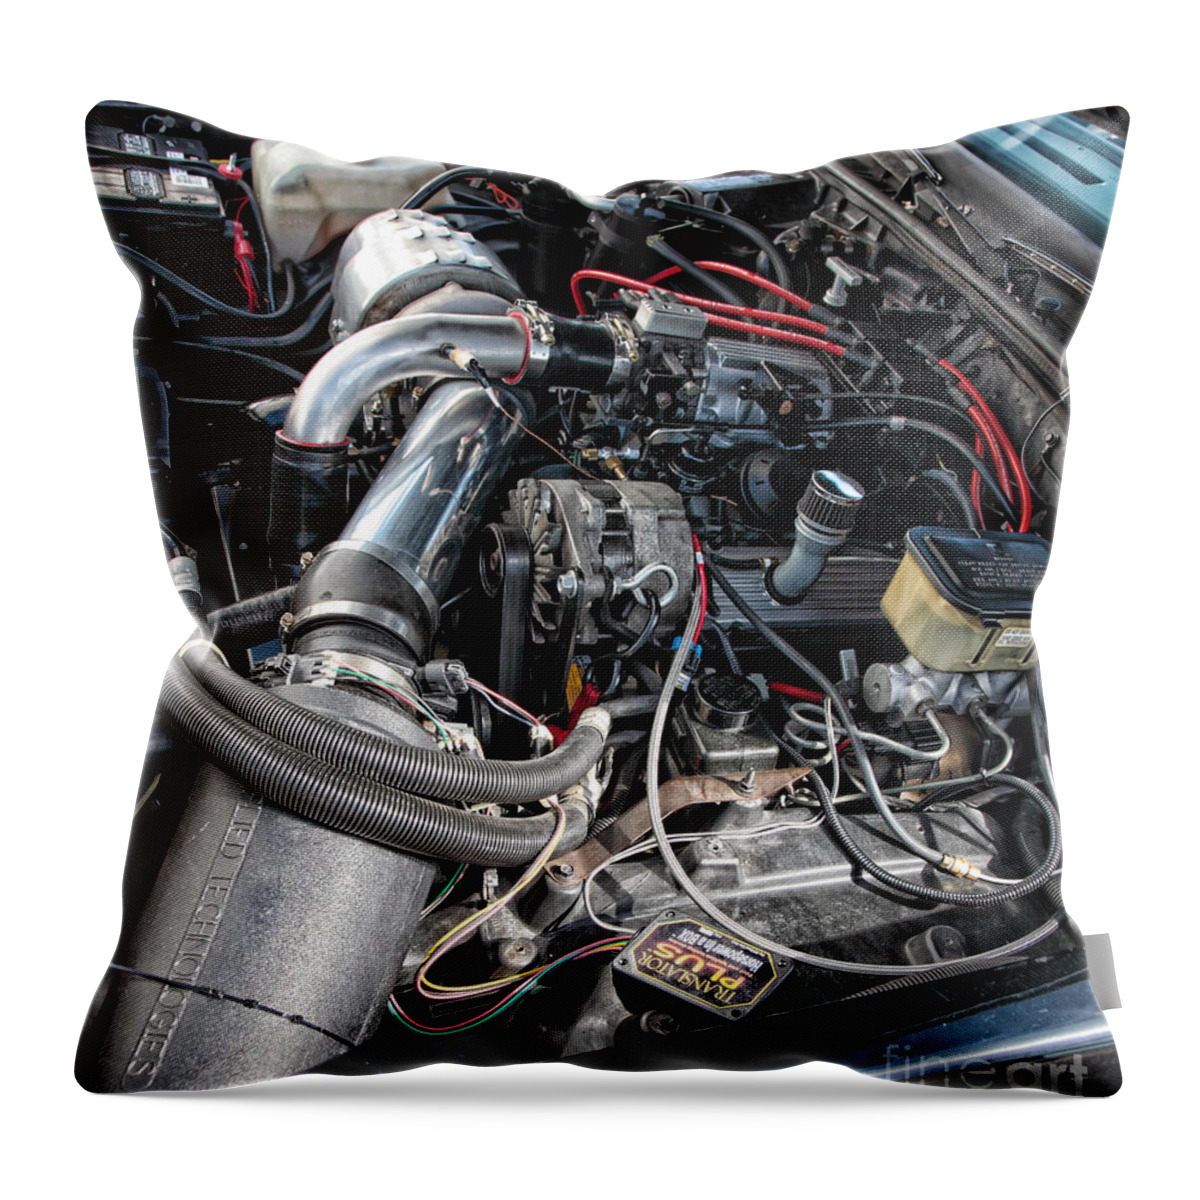 Buick Throw Pillow featuring the photograph Engine Compartment of a Buick Grand National by William Kuta